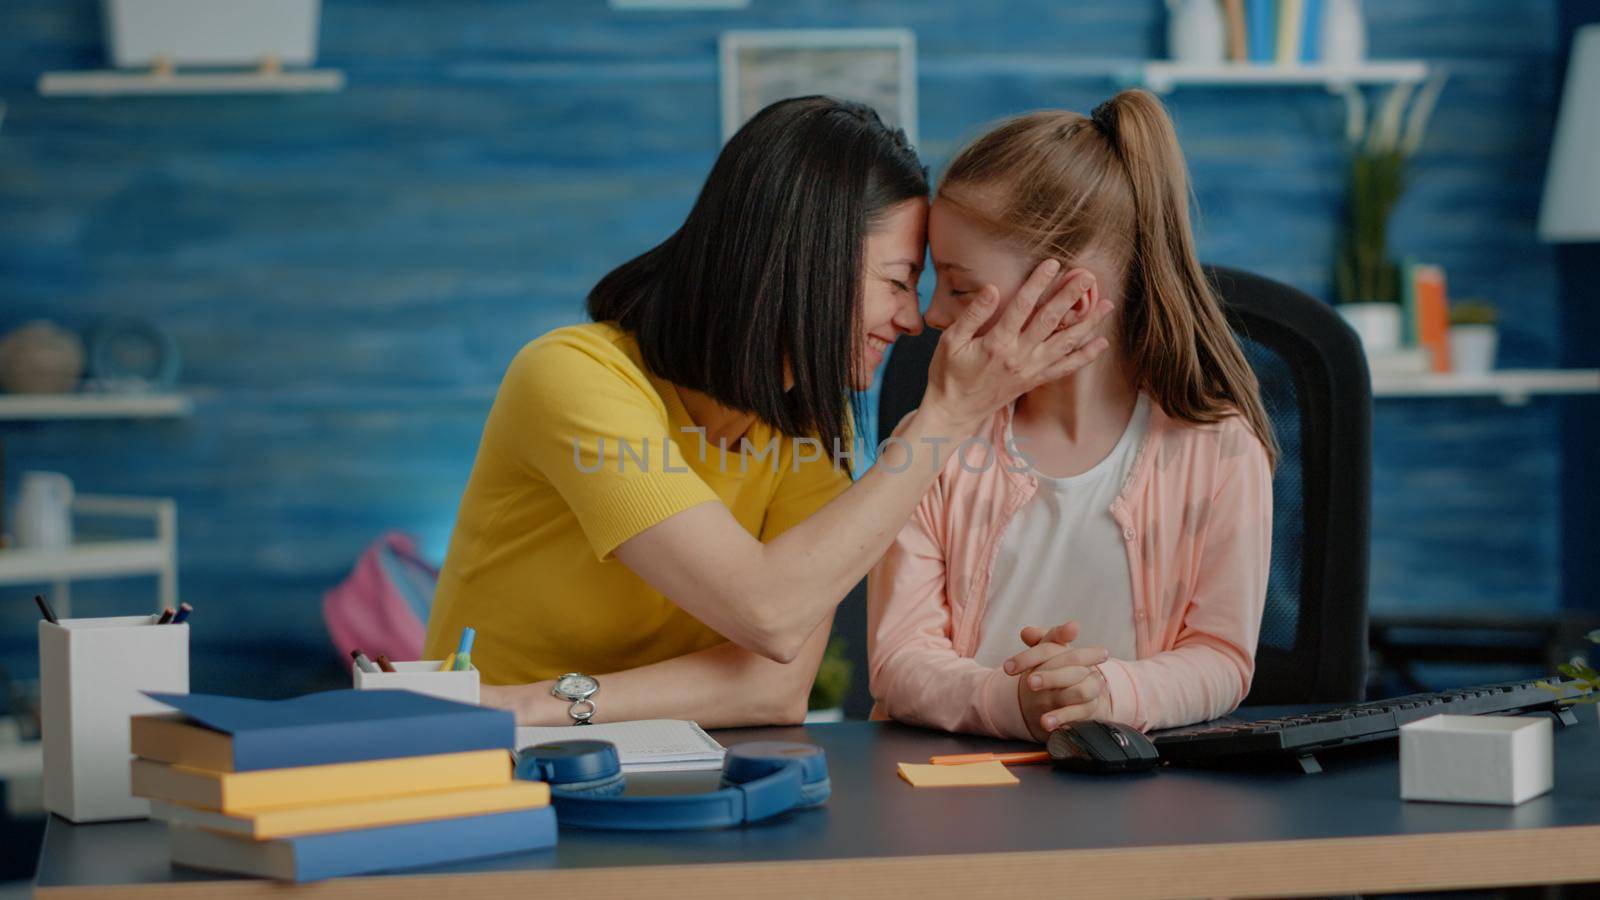 Little girl and mother preparing for online school courses, sitting at desk. Affectionate parent giving assistance and support to young child with remote class lessons and tasks for education.